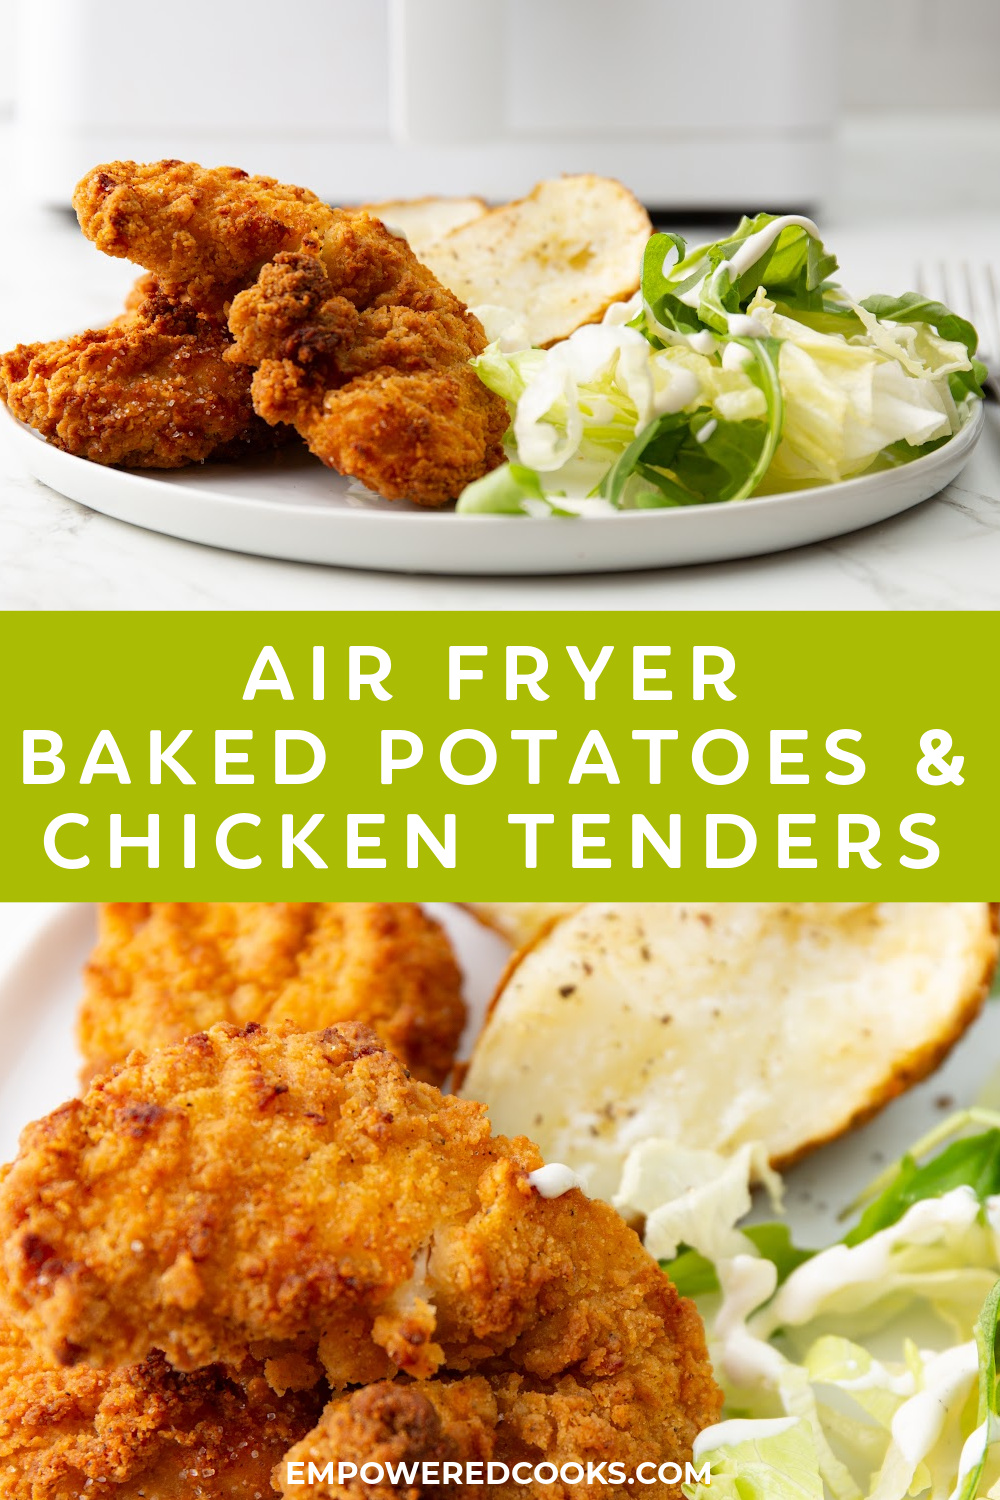 Air fryer baked potatoes and chicken tenders